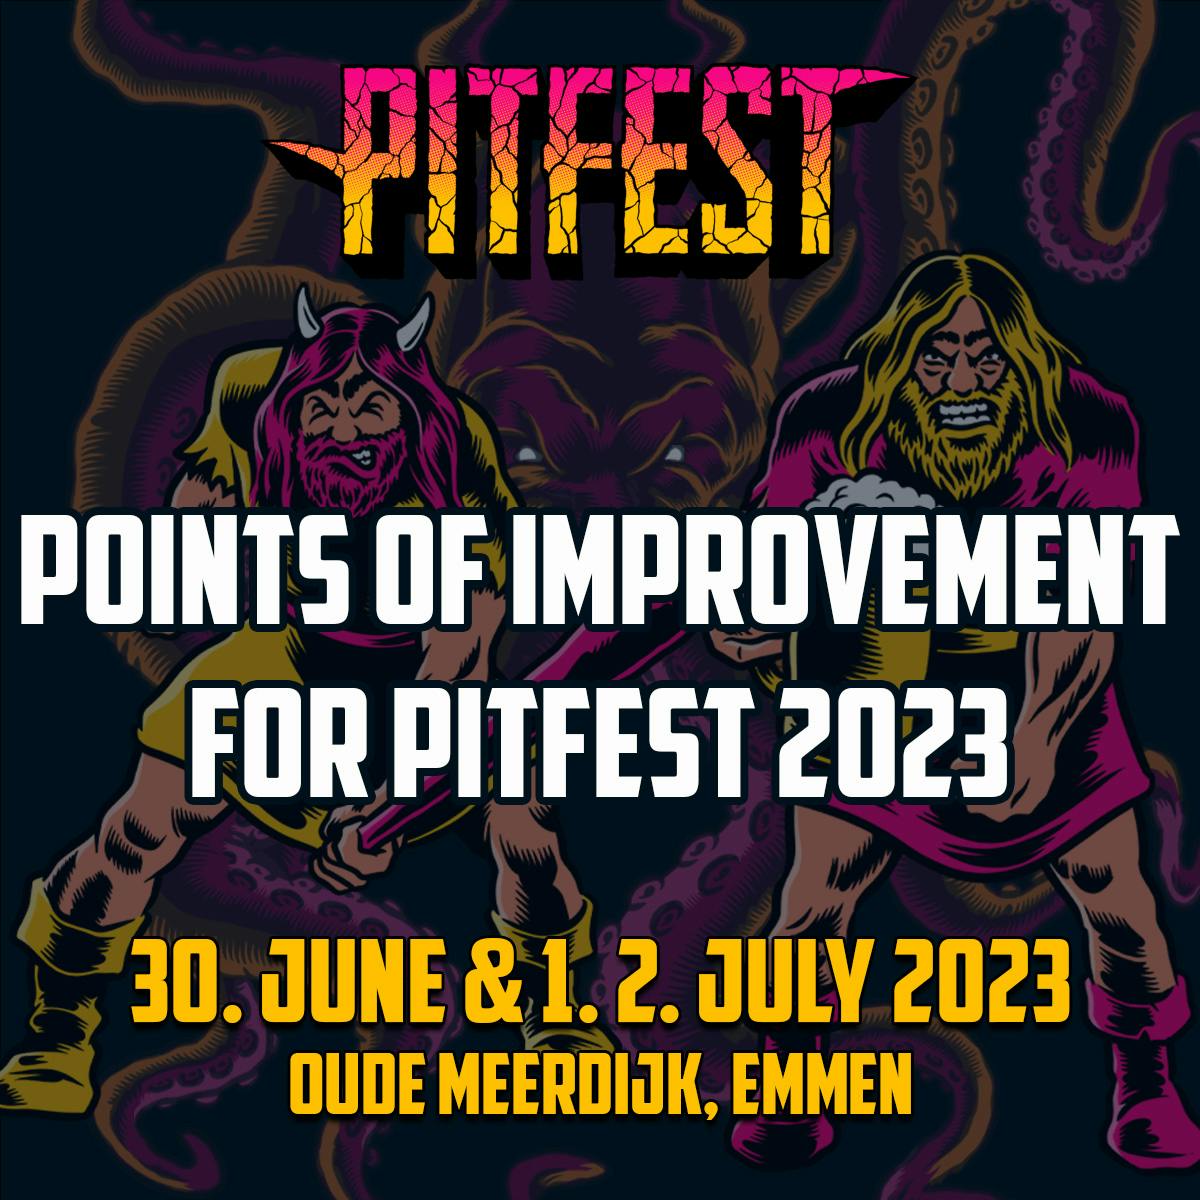 Points of improvement for Pitfest 2023